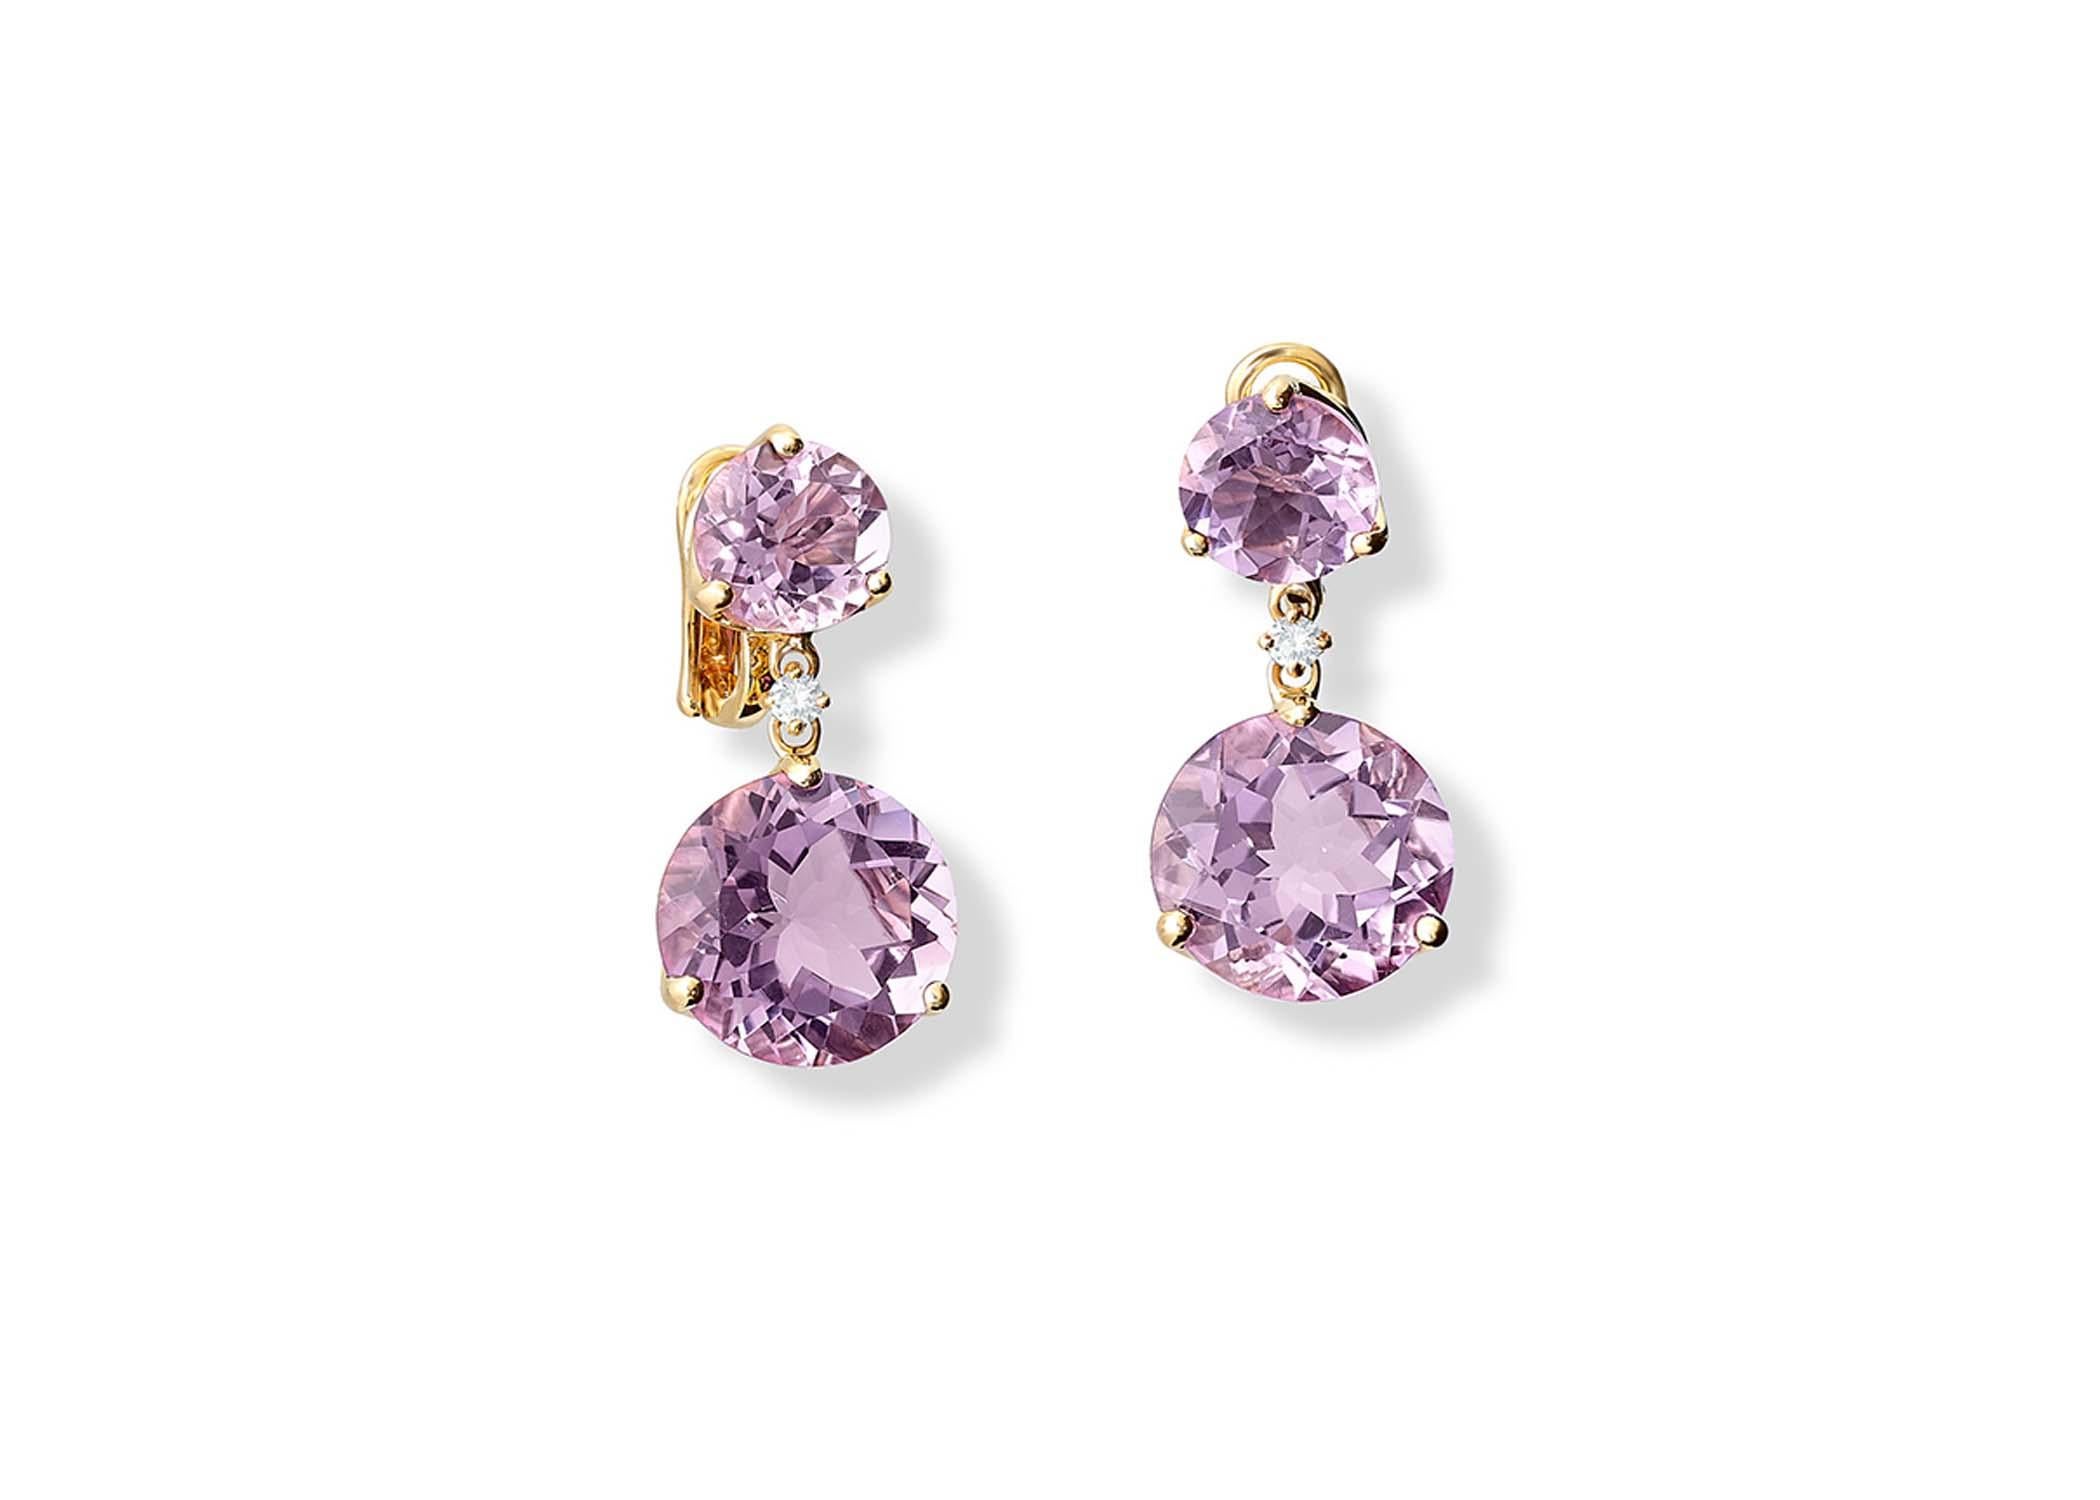 Riviere double earrings in 9ct yellow gold set with facetted amethyst and diamonds, with clip and post. Inspired by the classic Riviere style necklace typical of the Georgian Era (1714-1837). From the Journey to Scandinavia.